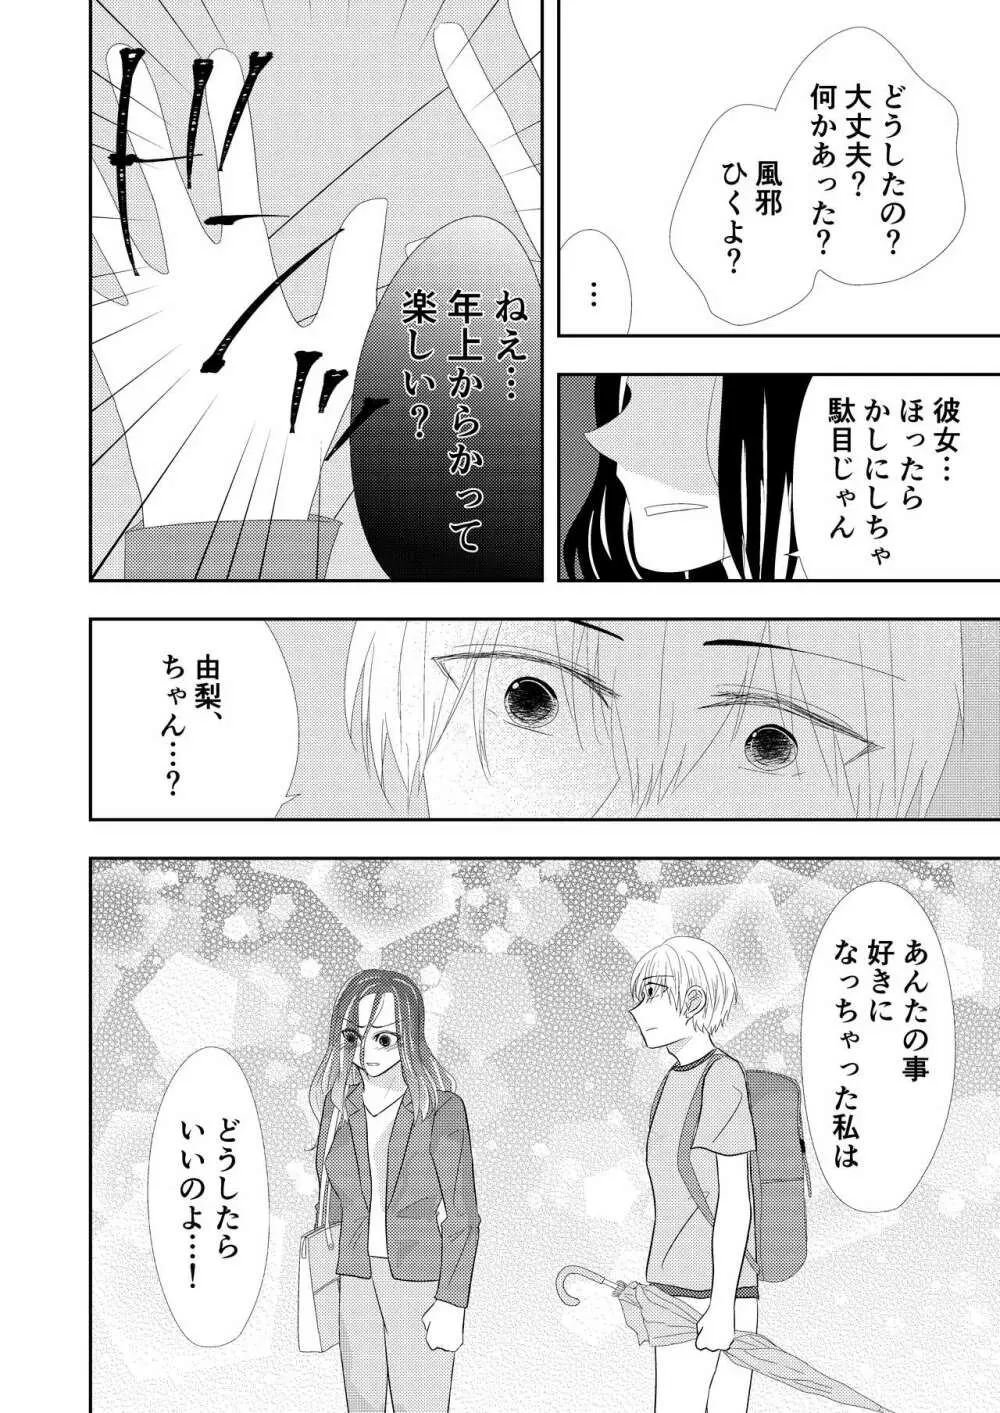 【TL】年下の幼馴染にプロポーズされました！？ - page22